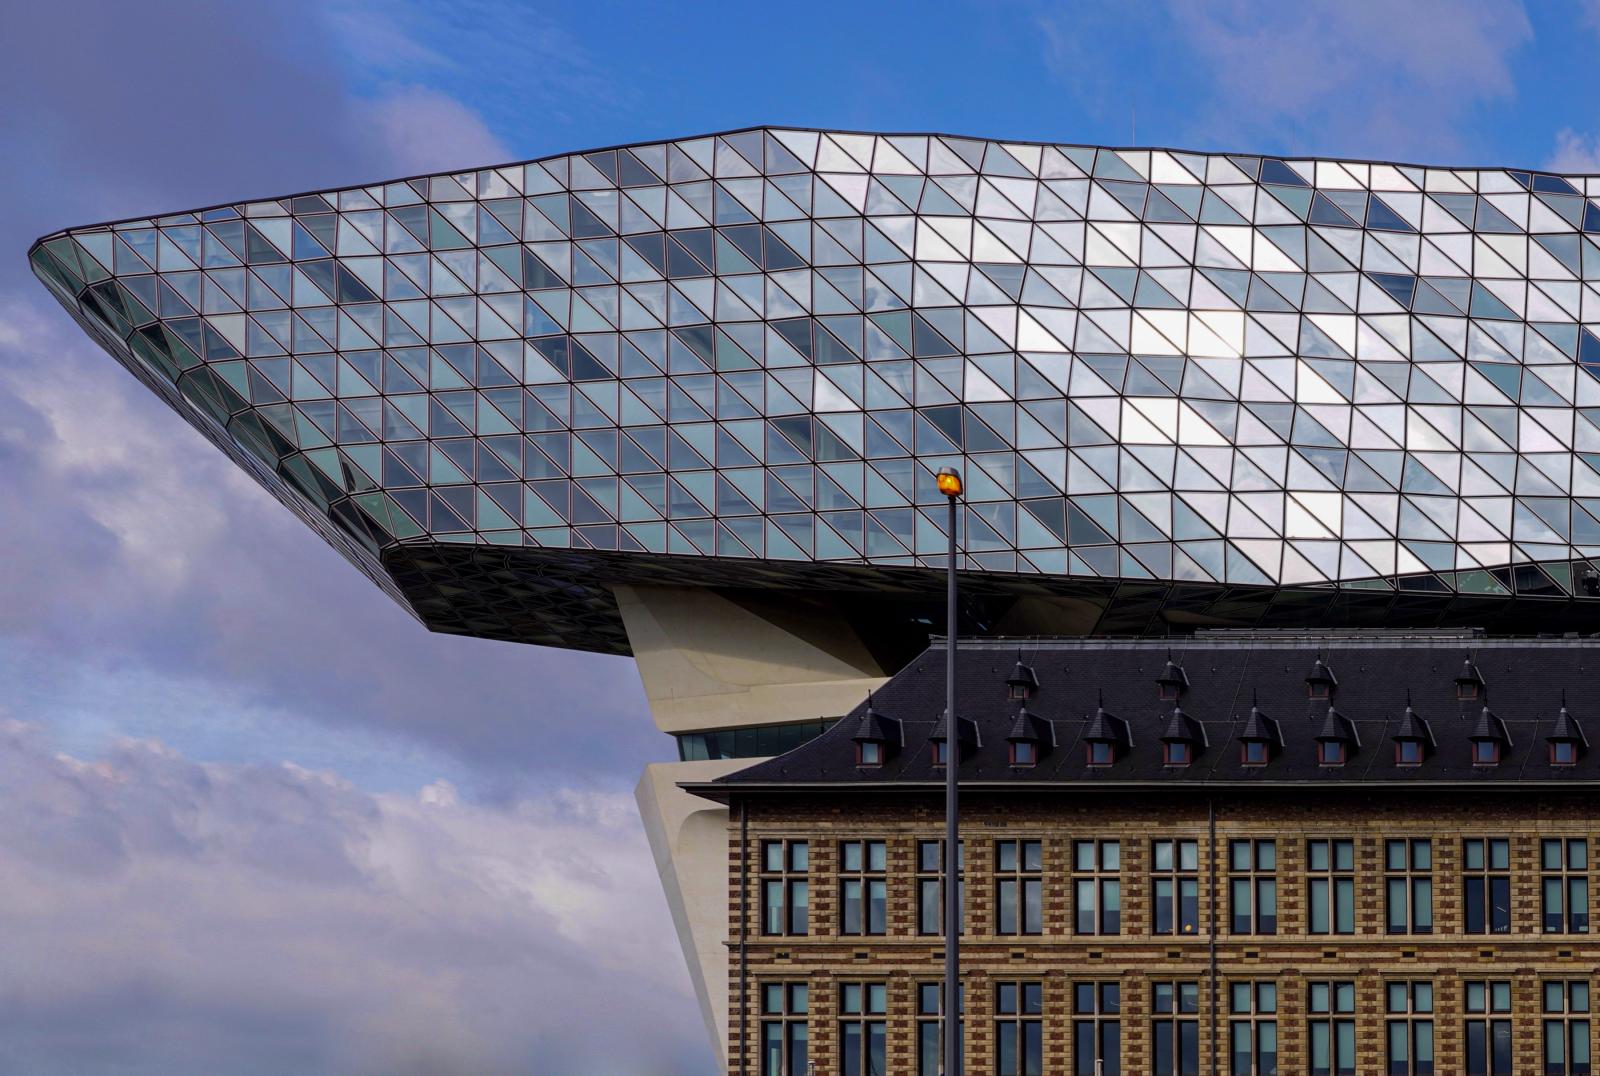 A building in the neo-futurism architectural style by Zaha Hadid | Buy this image